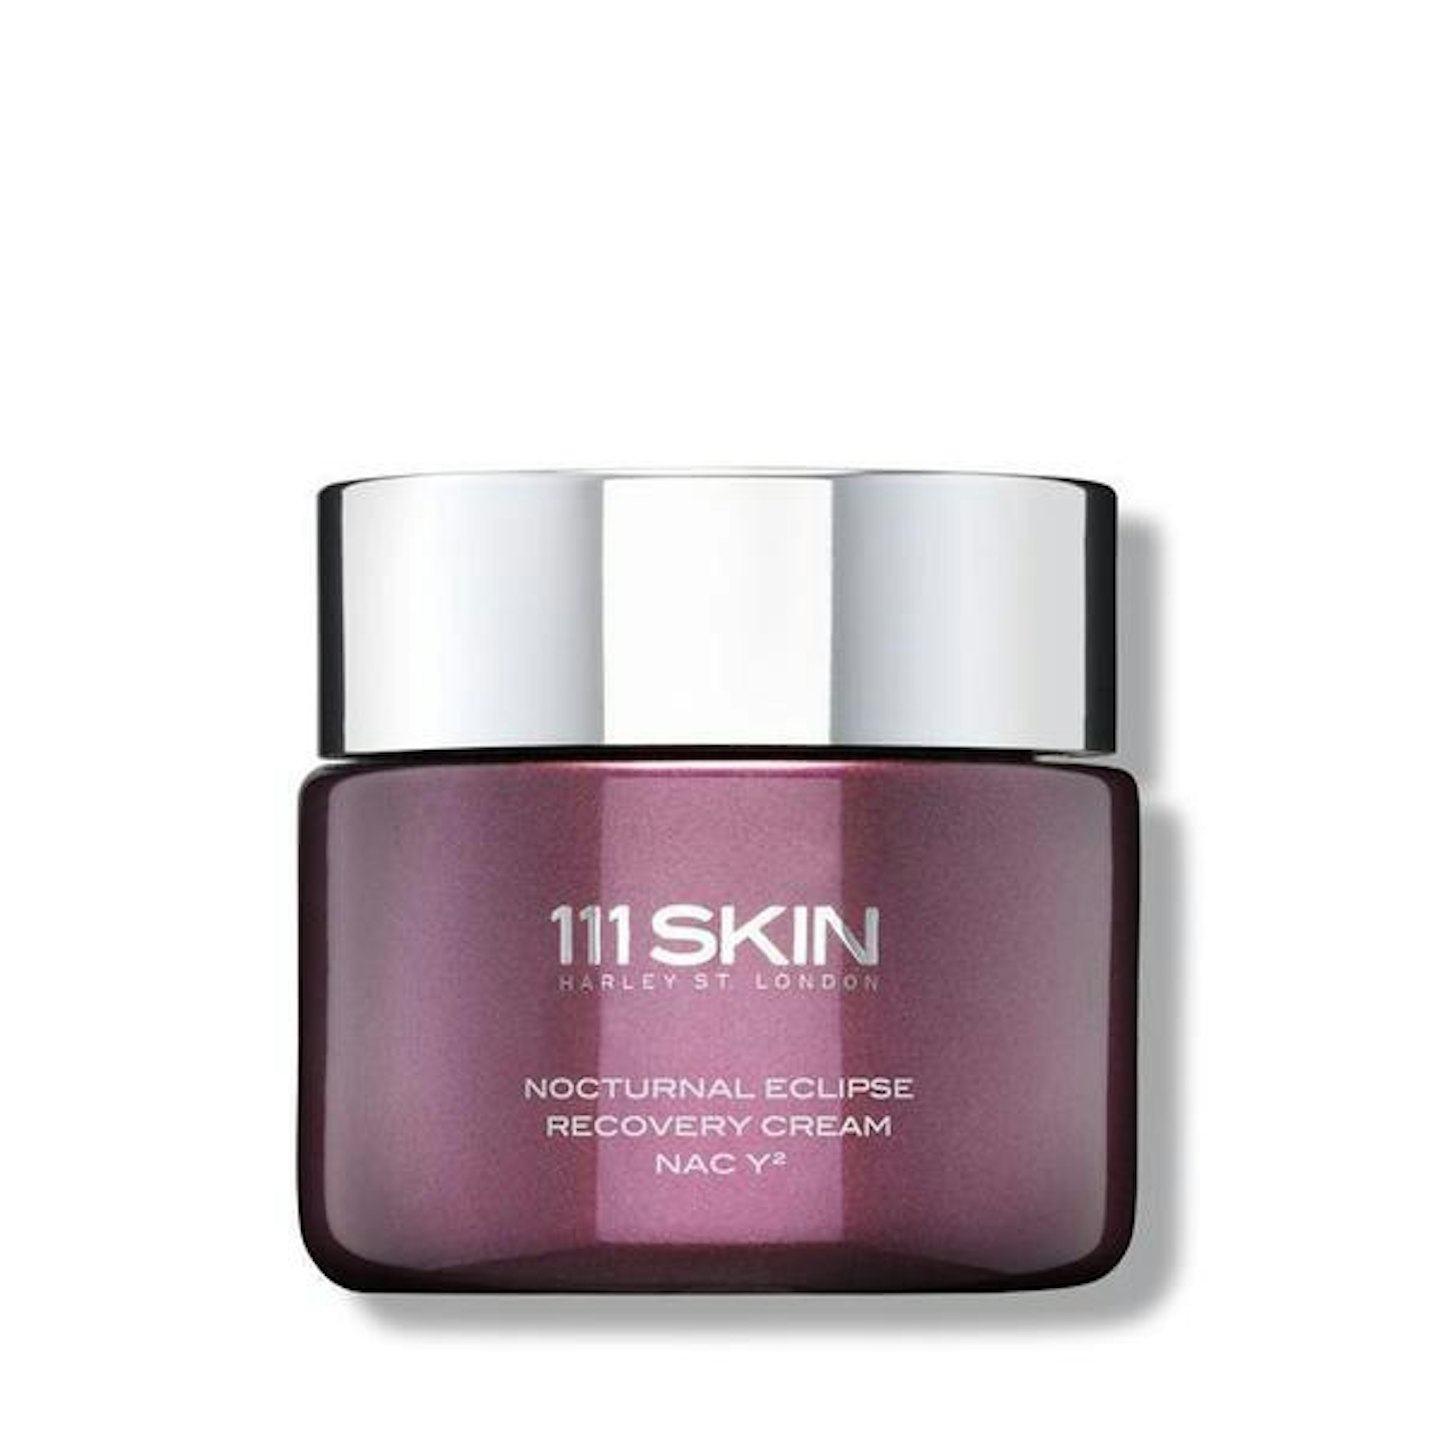 111Skin, Nocturnal Eclipse Recovery Cream, £160